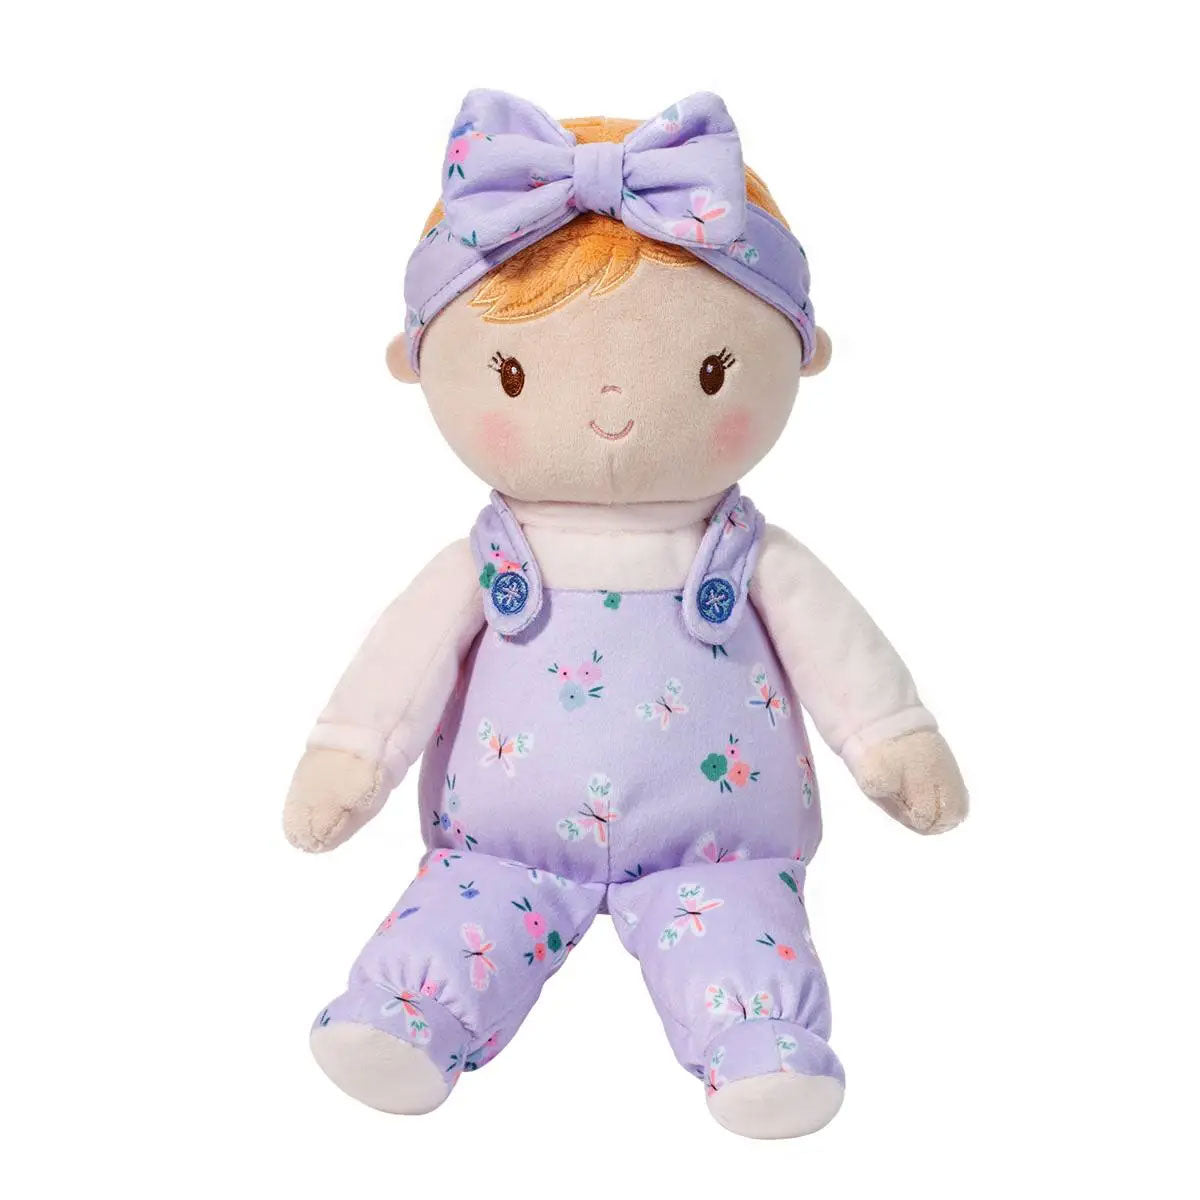 Willa Butterfly Soft Doll from Douglas Cuddle Toys